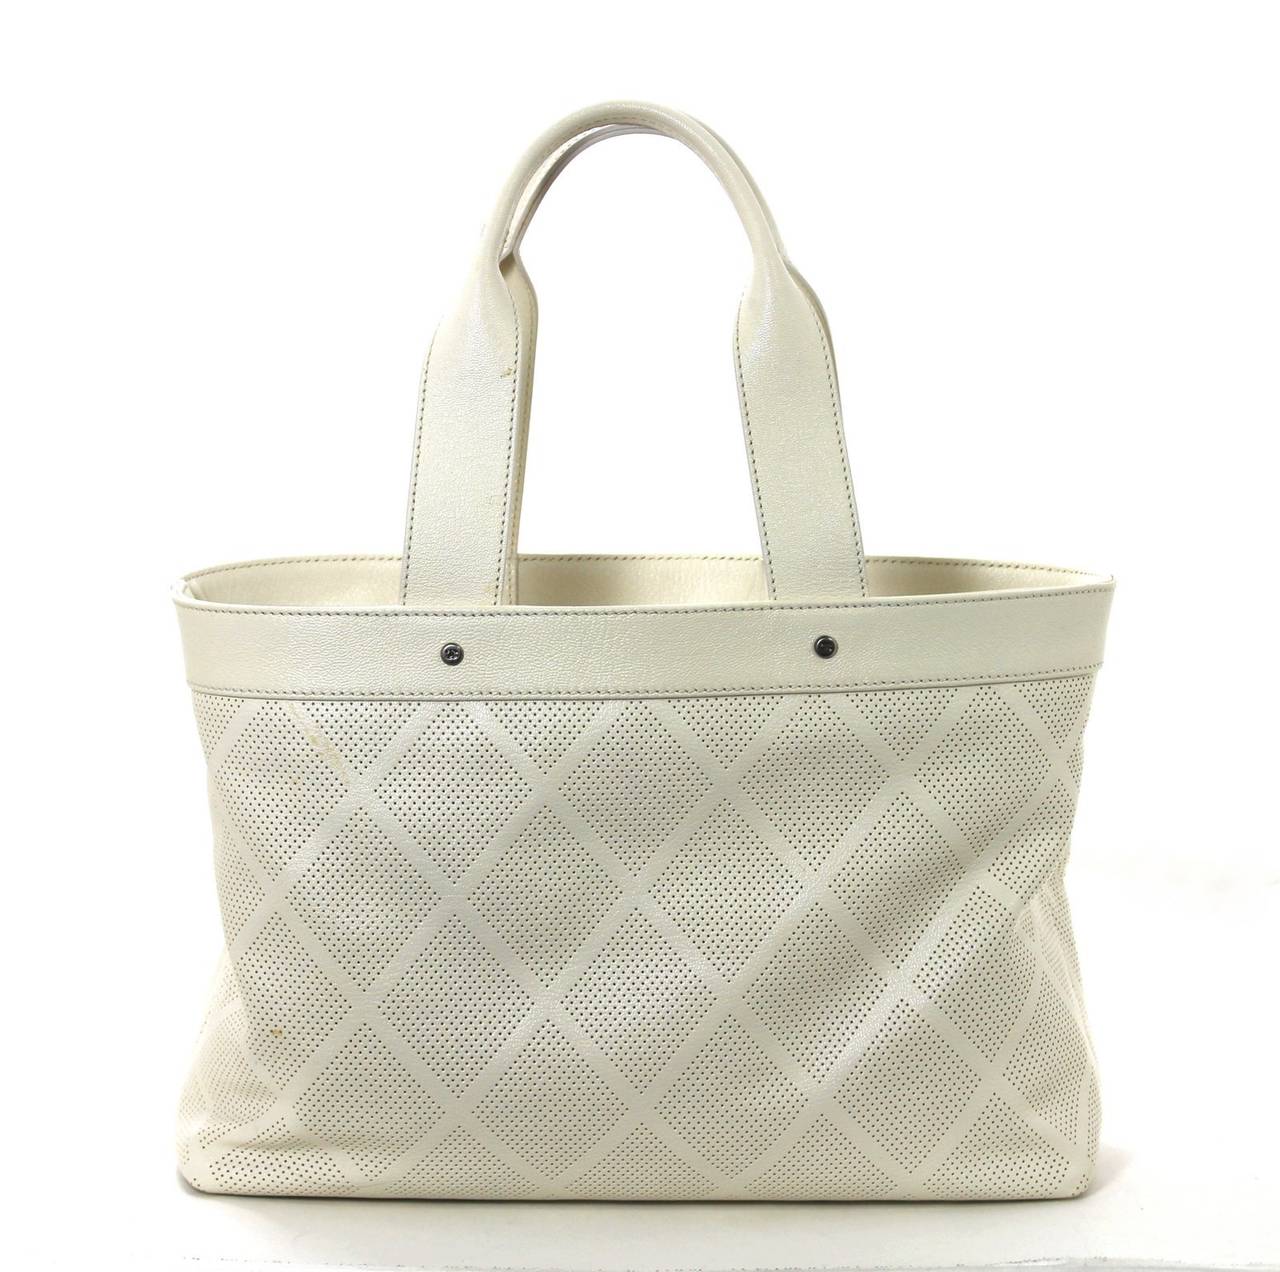 Just in time for summer, this Ivory Perforated Leather Tote Bag from Chanel is a fabulous find.  It is in better than excellent condition with only two tiny spots on the front that are not particularly noticeable; the interior is spotless.  The